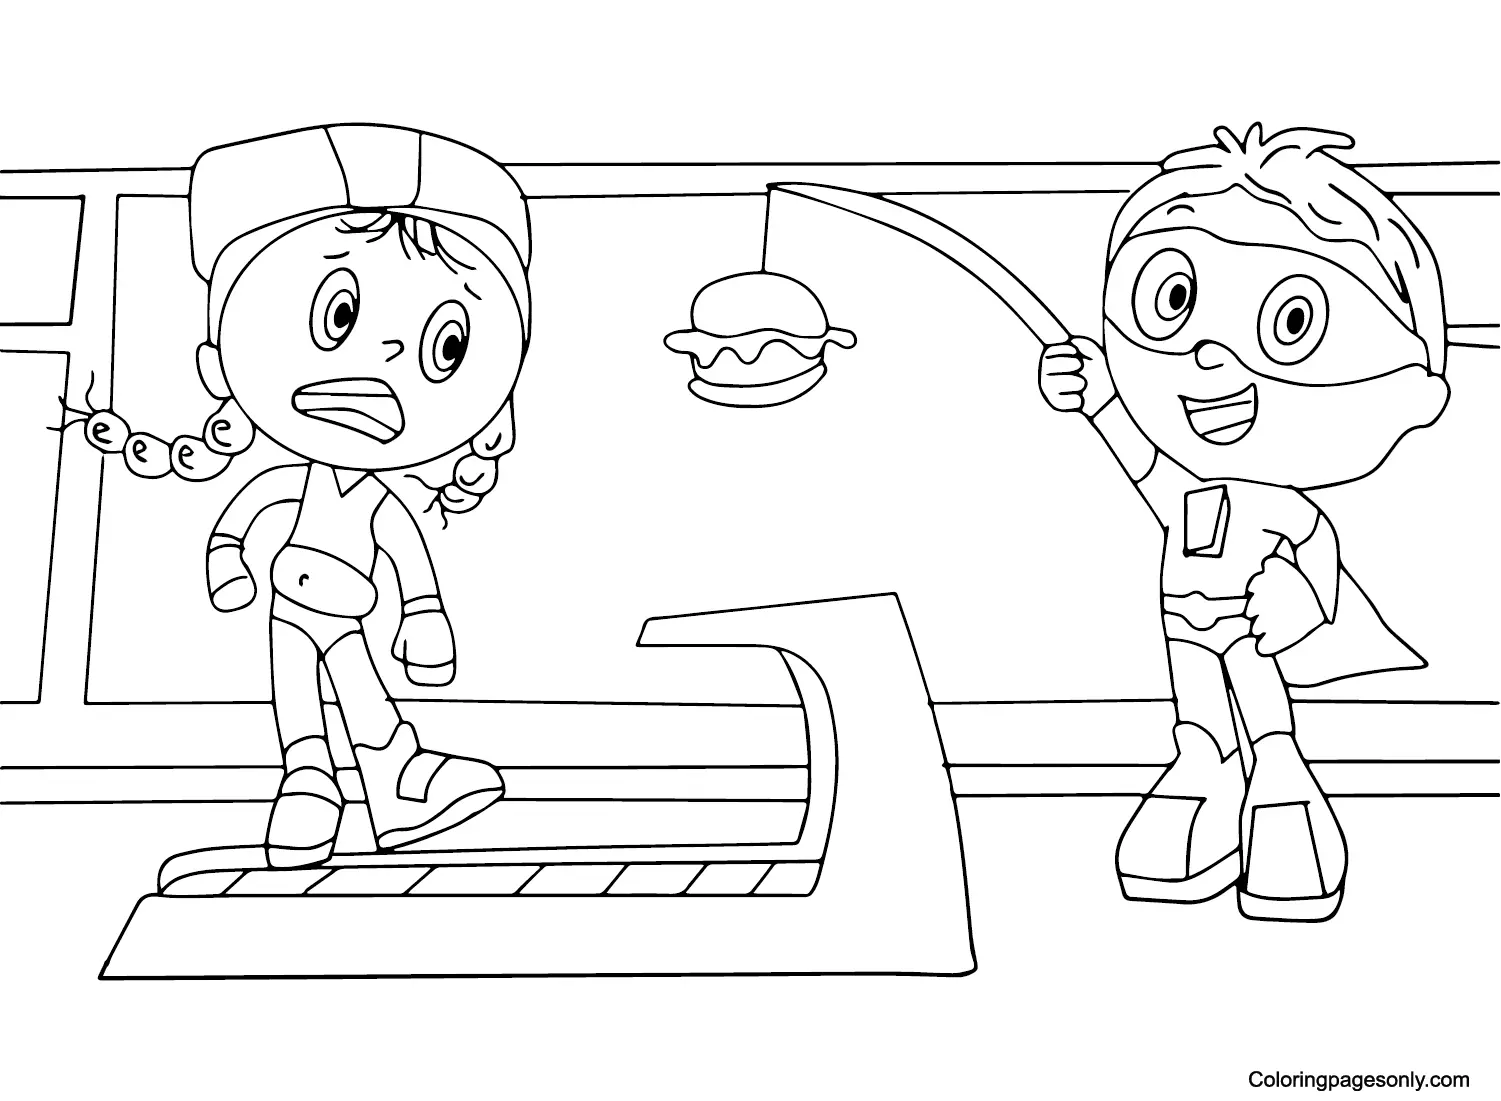 Super Why Coloring Pages